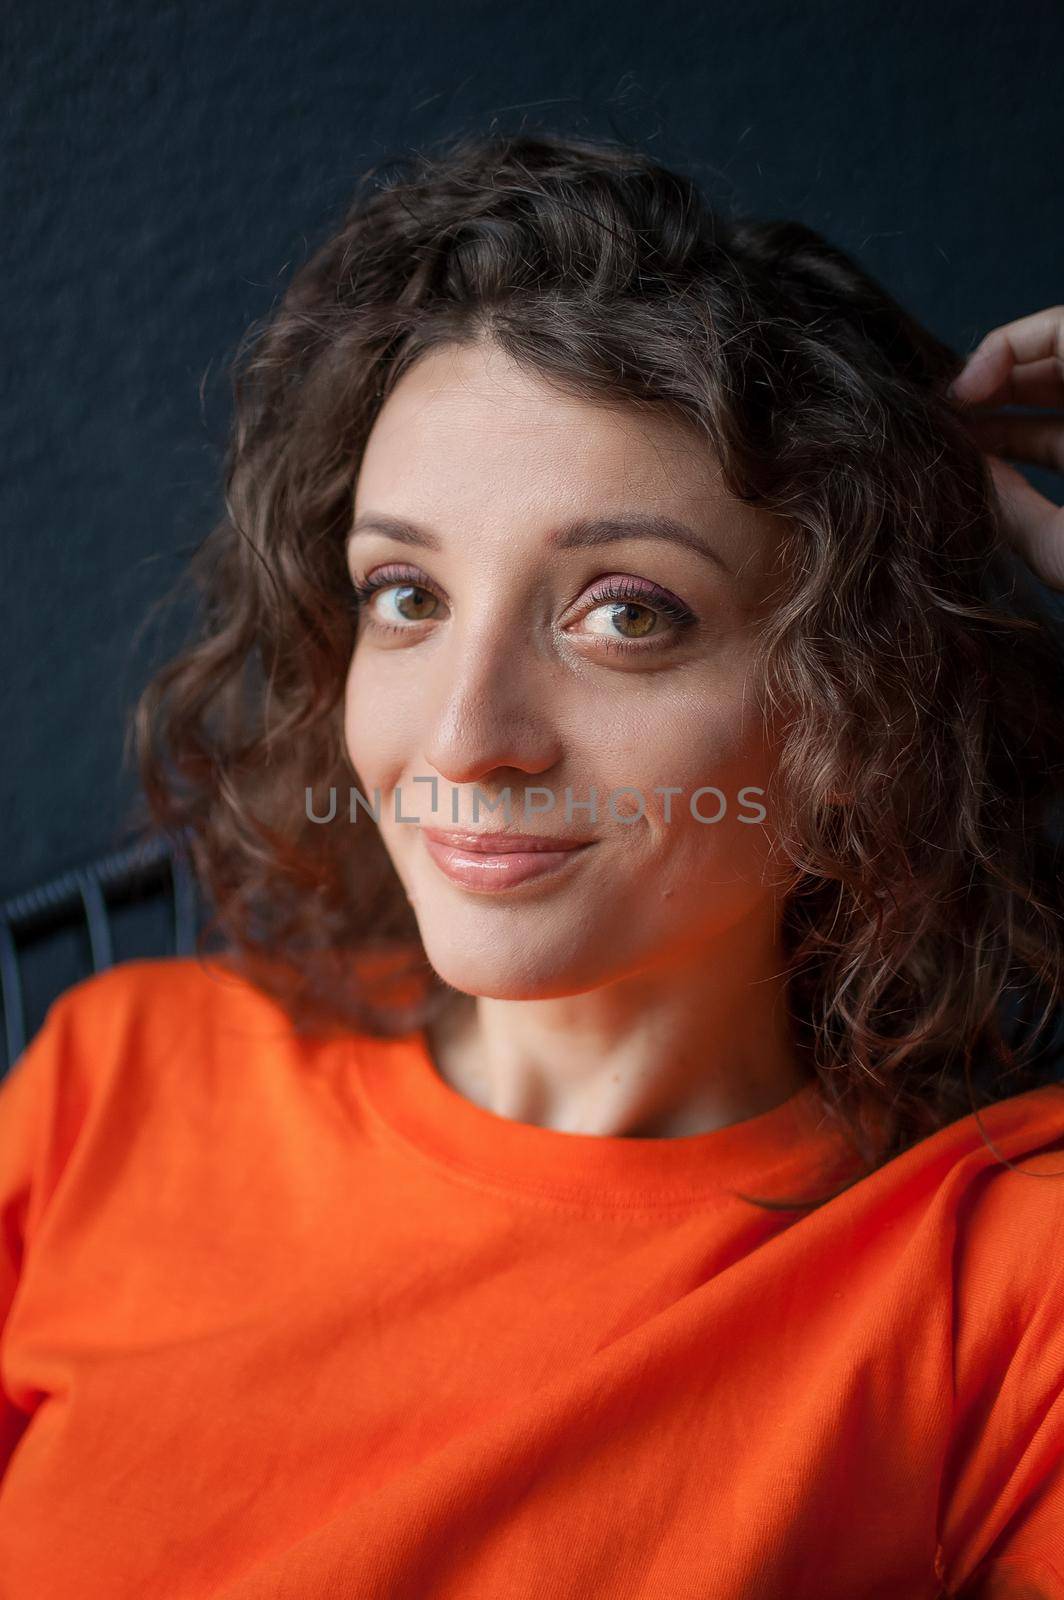 Female portrait of a beautiful curly girl in bright orange t-shirt at home in her apartment on dark background, happy people concept.